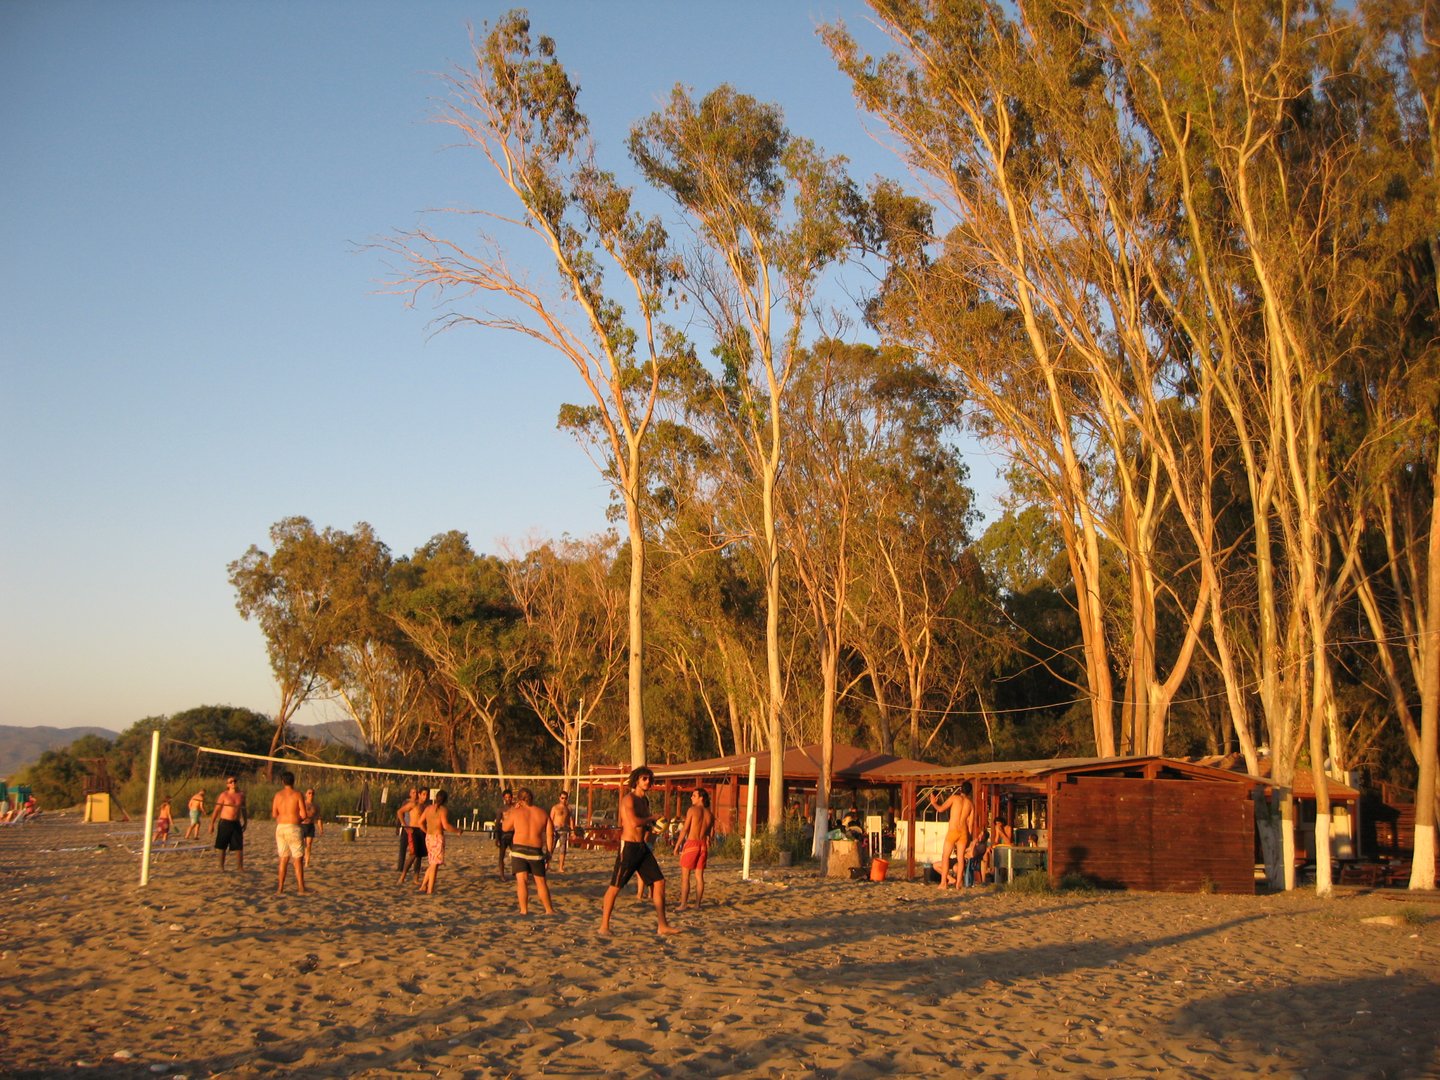 feature iole volleyball on the beach when the campsite was open